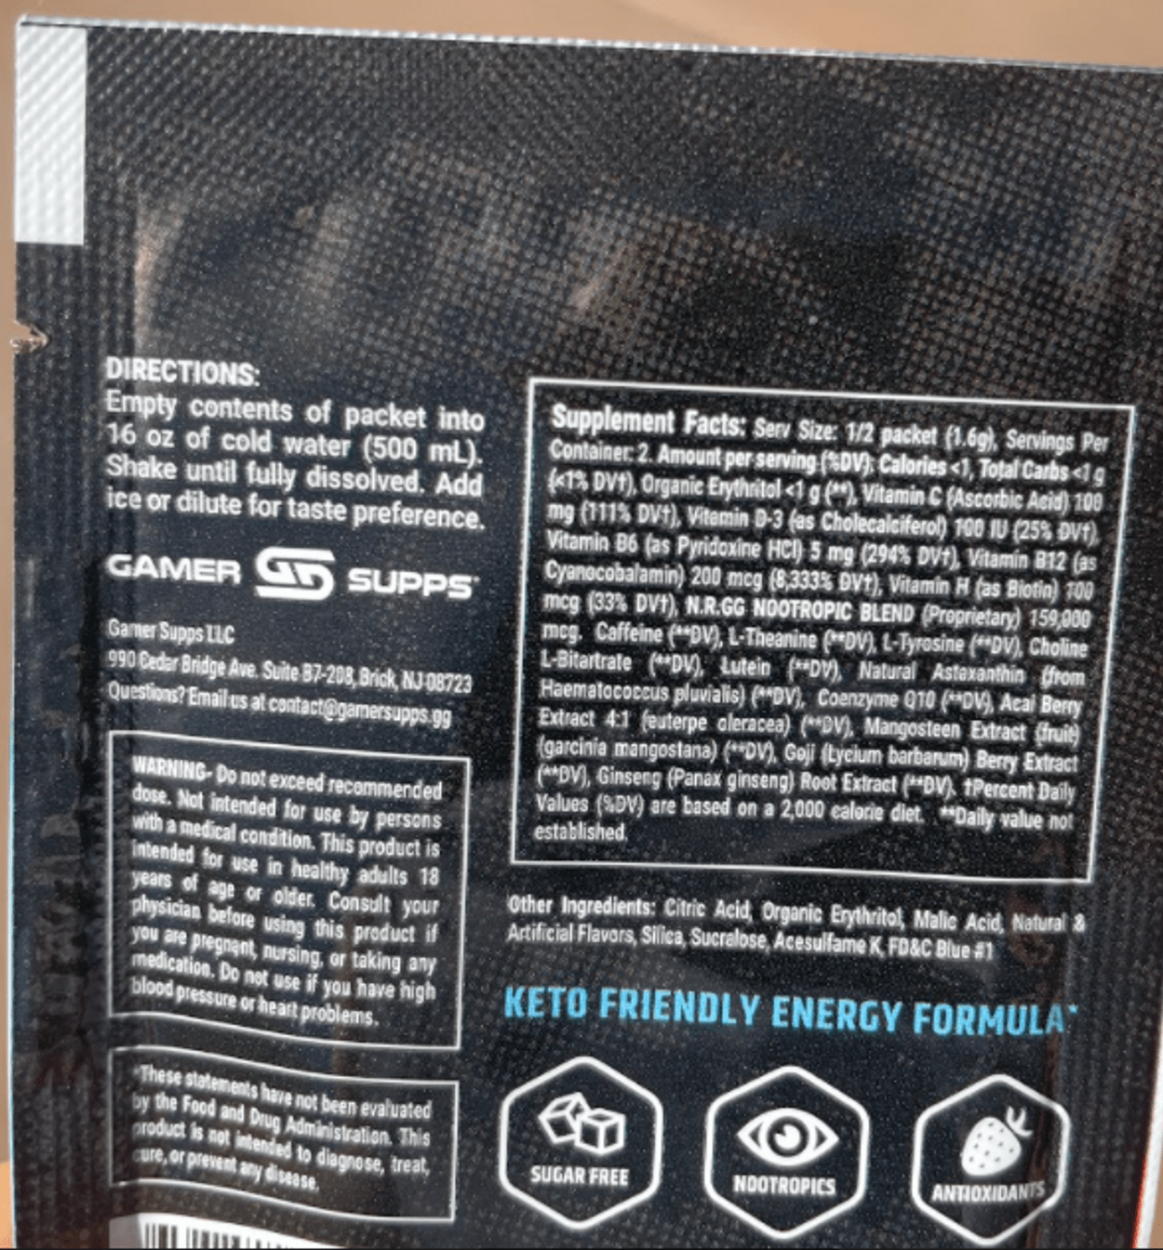 Supplement facts of GamerSupps GG.